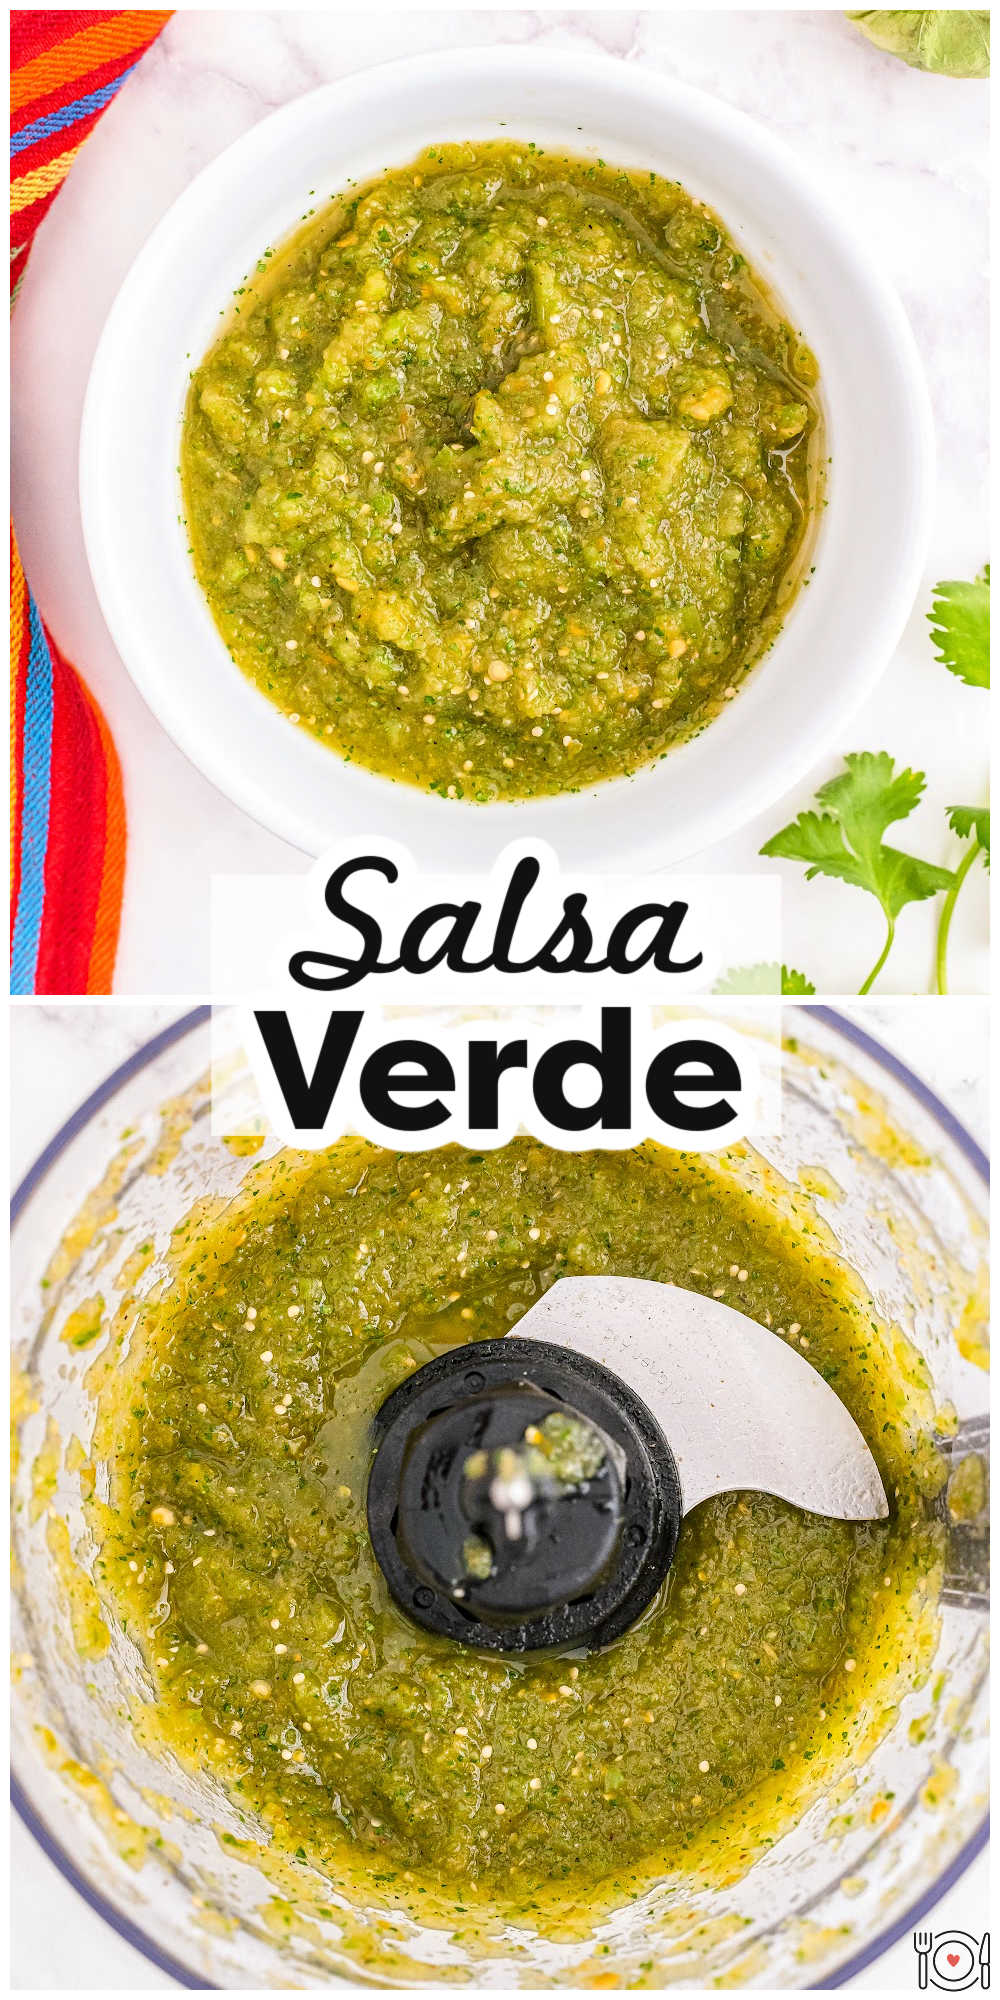 This Salsa Verde recipe packs a lot of flavors, and it takes a minimum of time and effort to prepare. Just 10 minutes, to be exact, plus chilling time. via @foodfolksandfun